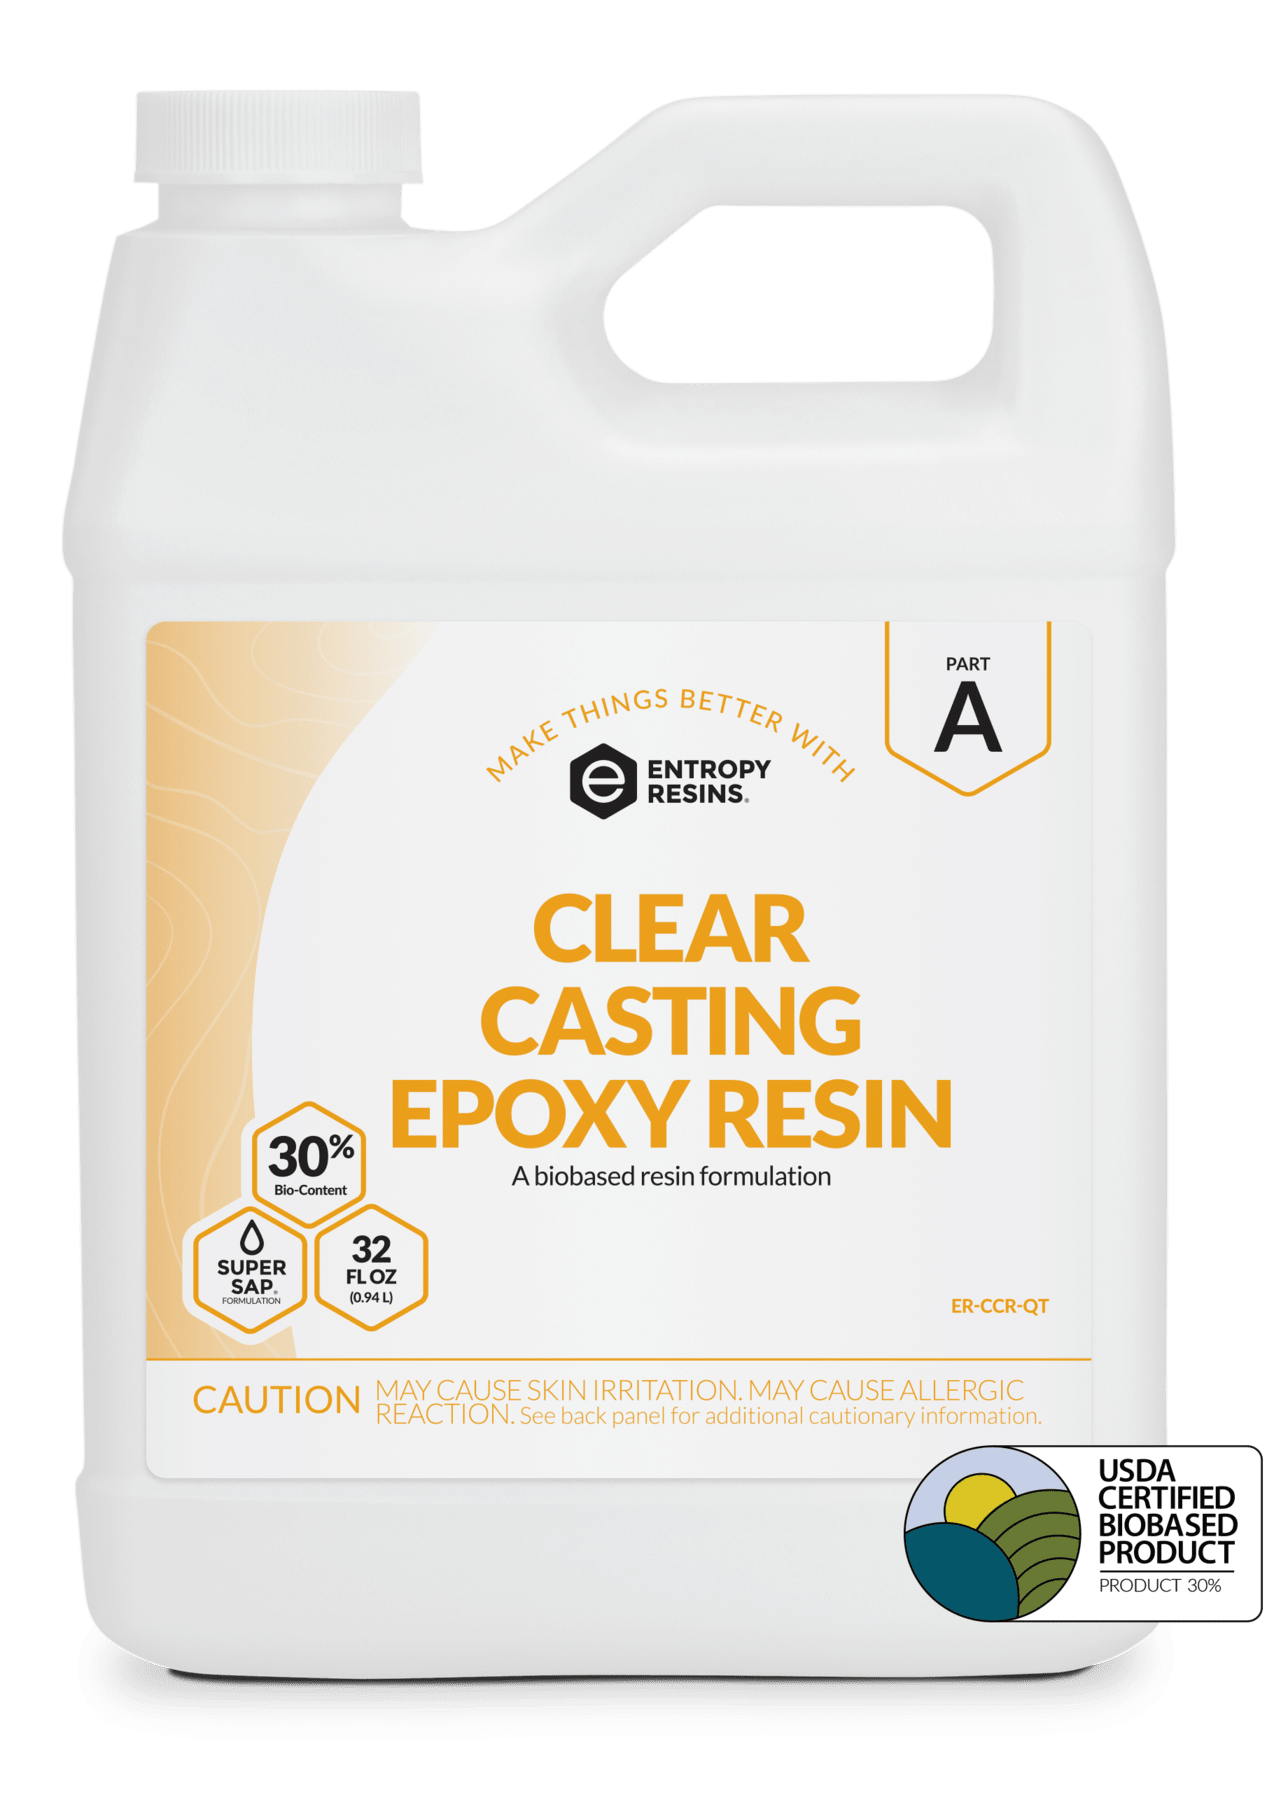 SuperClear Epoxy Resin Crystal Clear 2 Gallon Resin Kit for Casting Resin, Art R